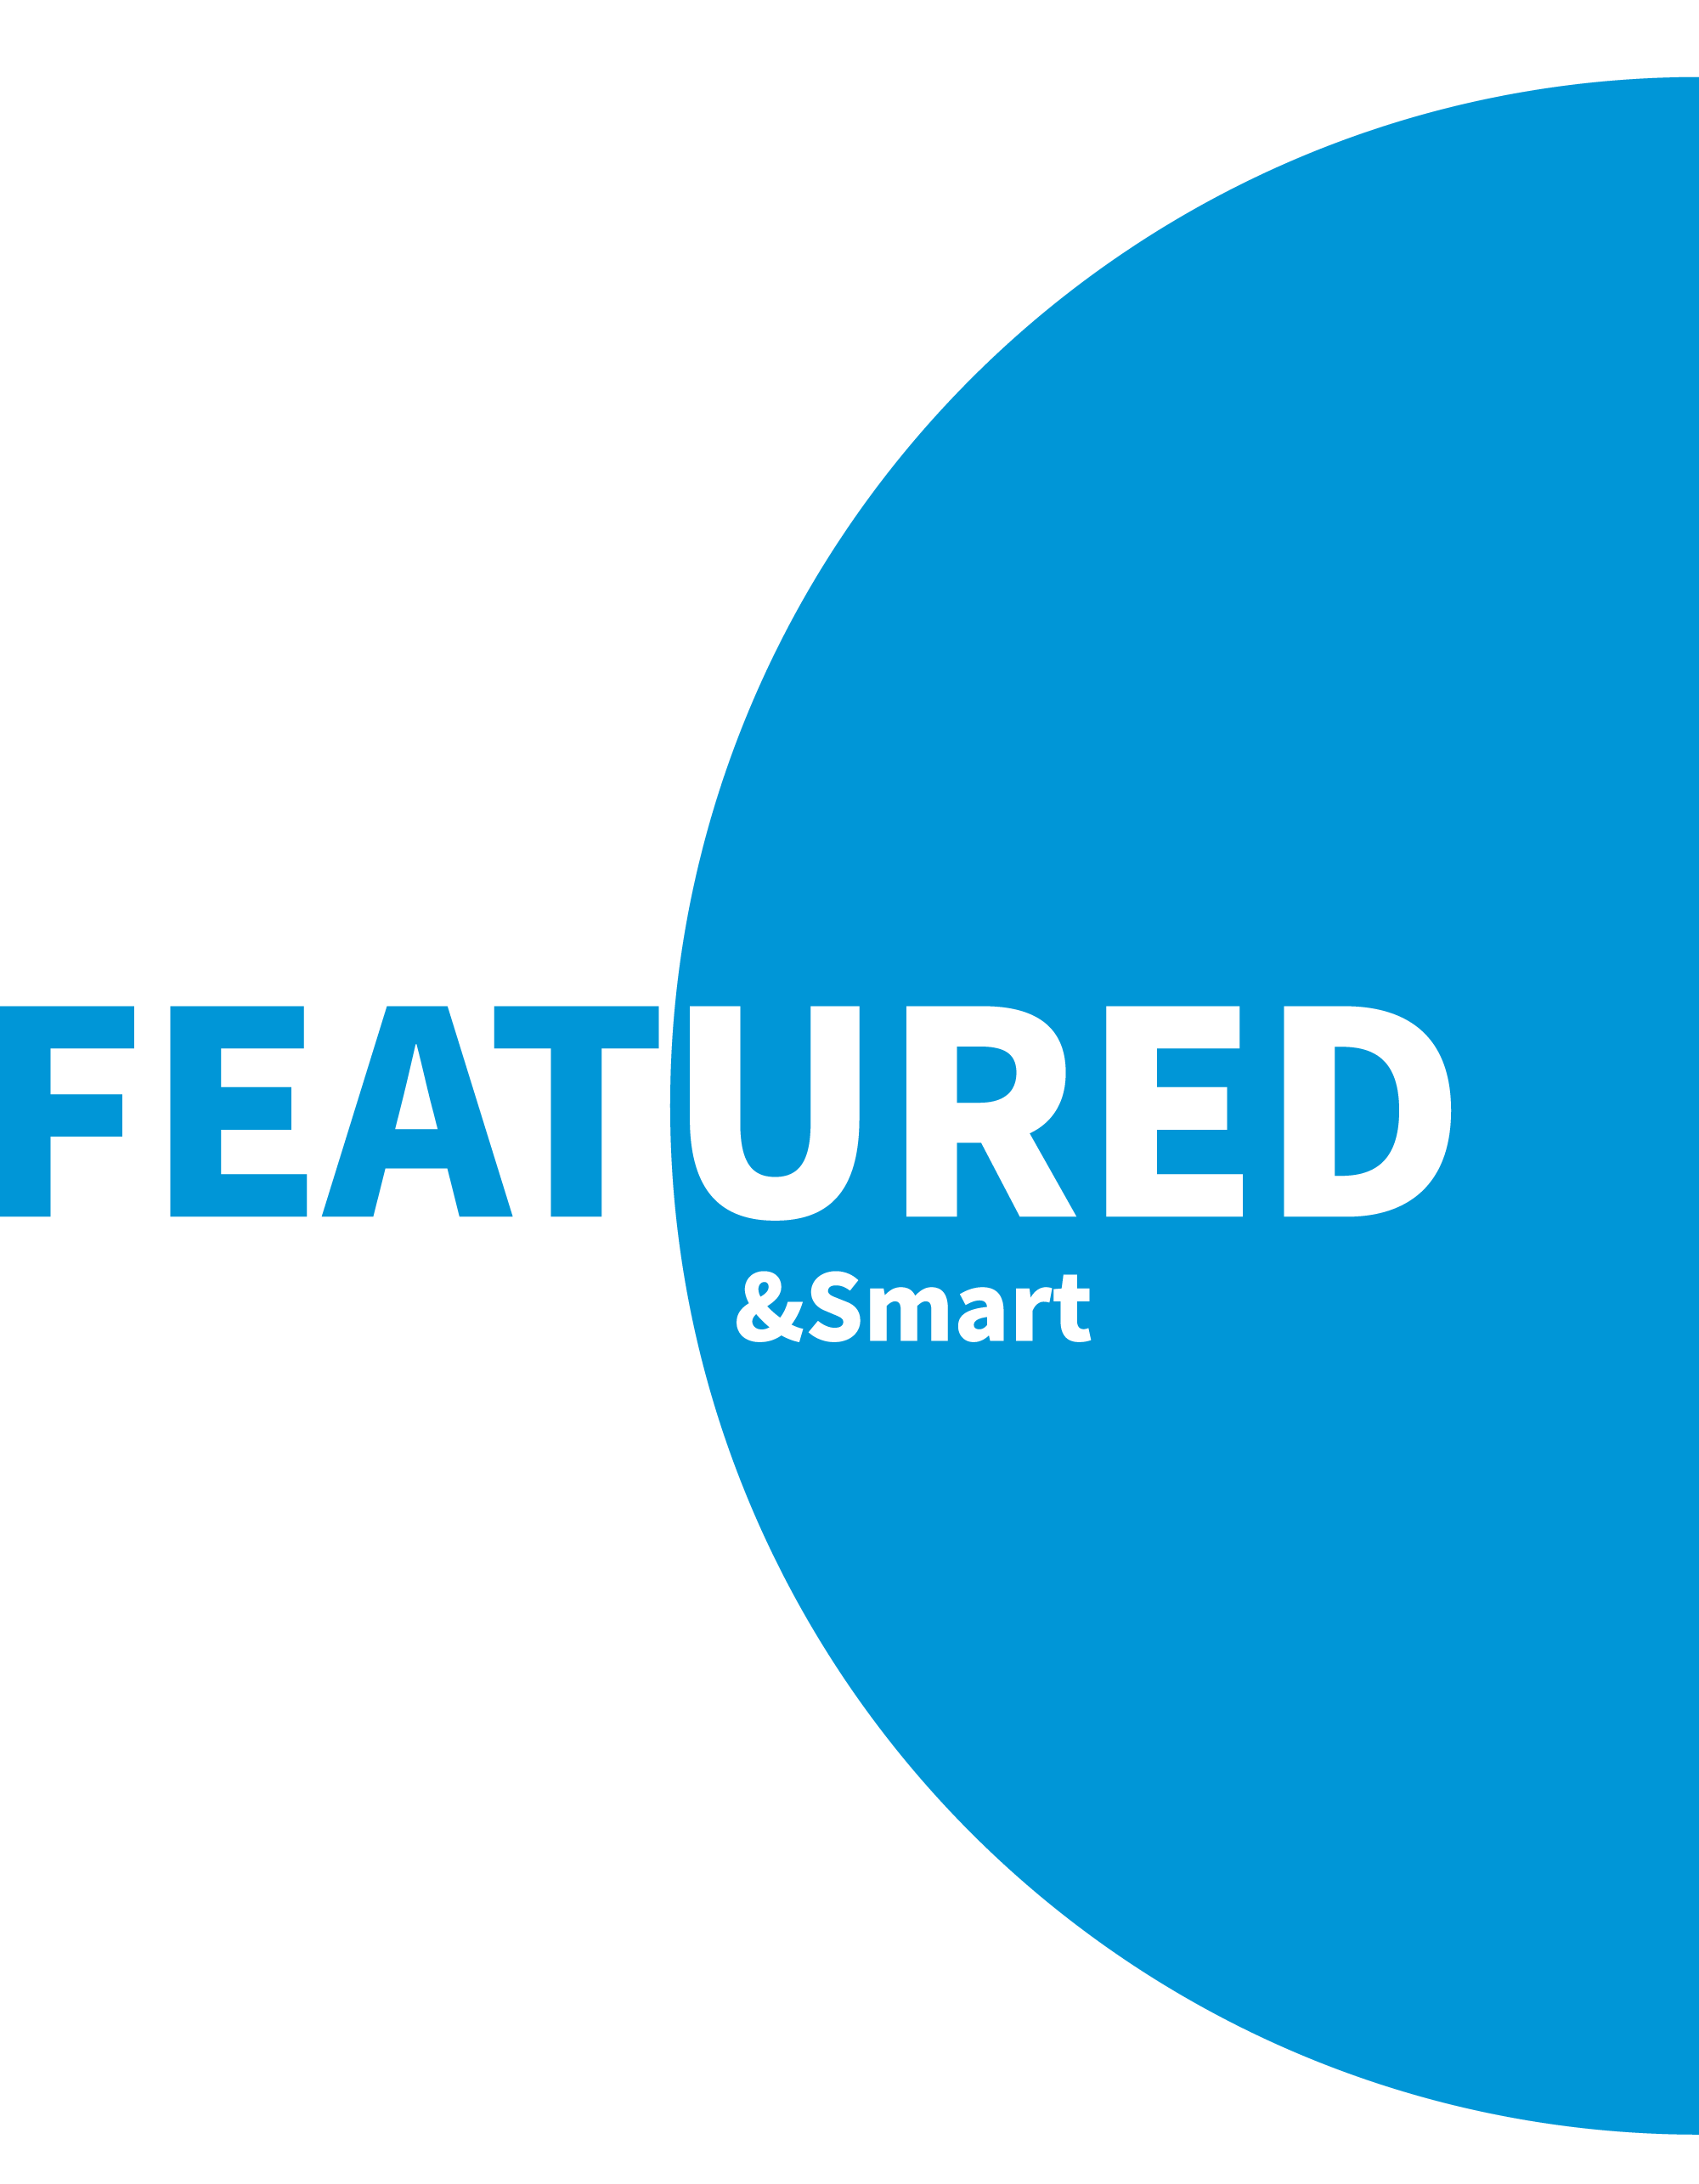 FEATURED & Smart